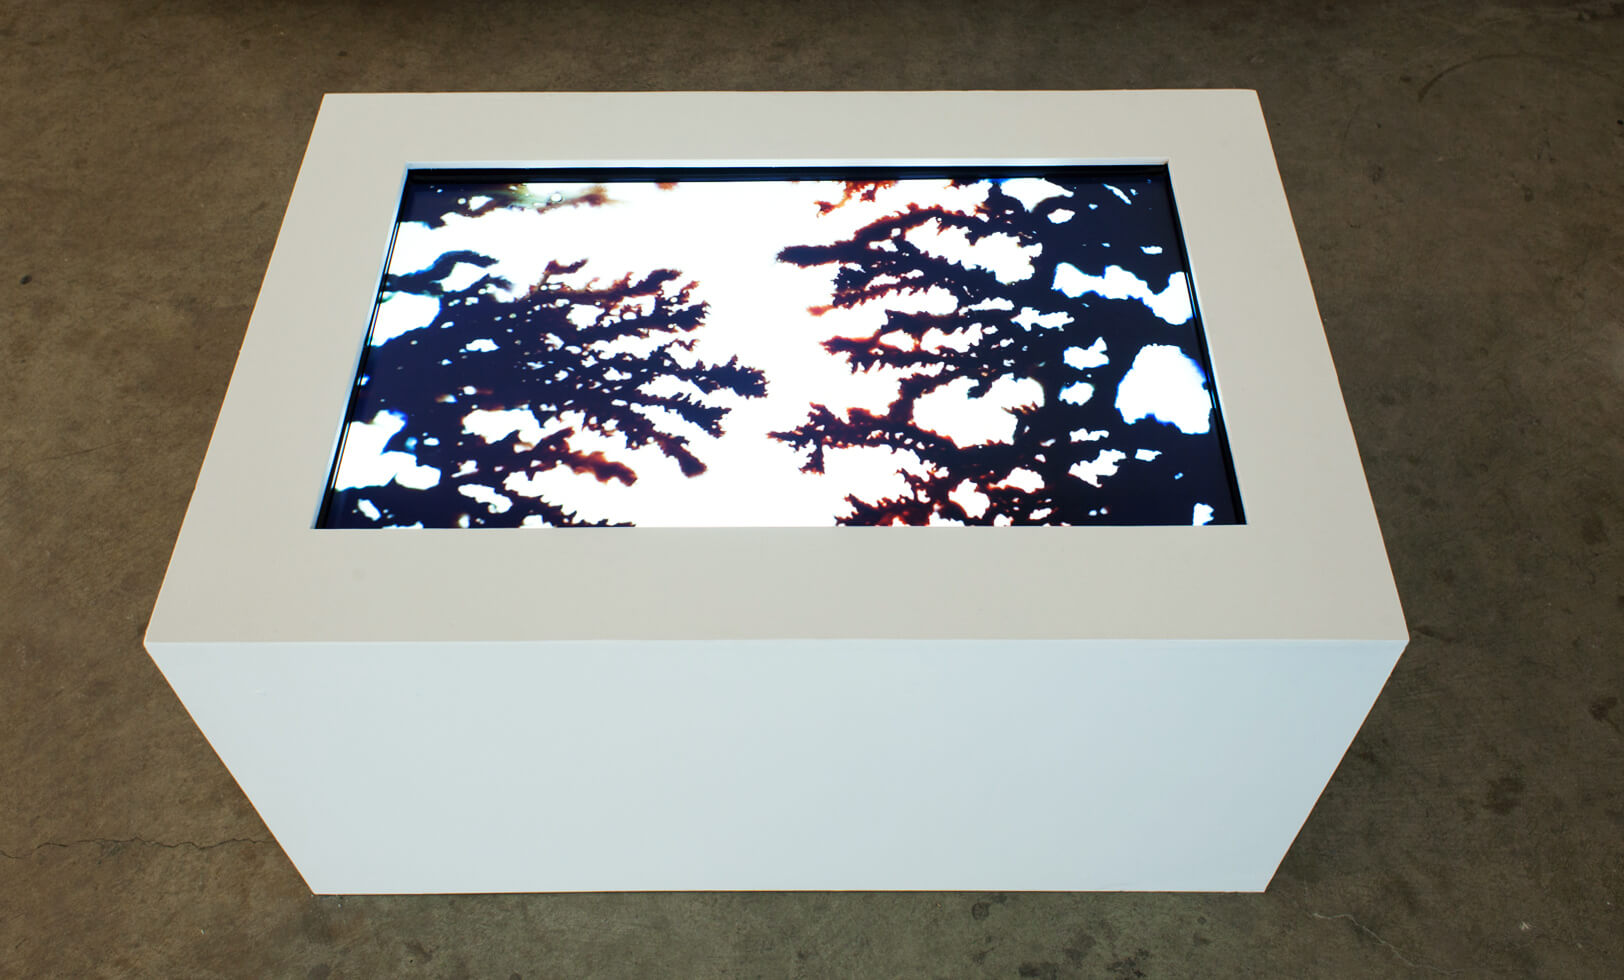 Installation view.  Expansive, 2015, plywood box, monitor, HD video, color, no sound, 5 min